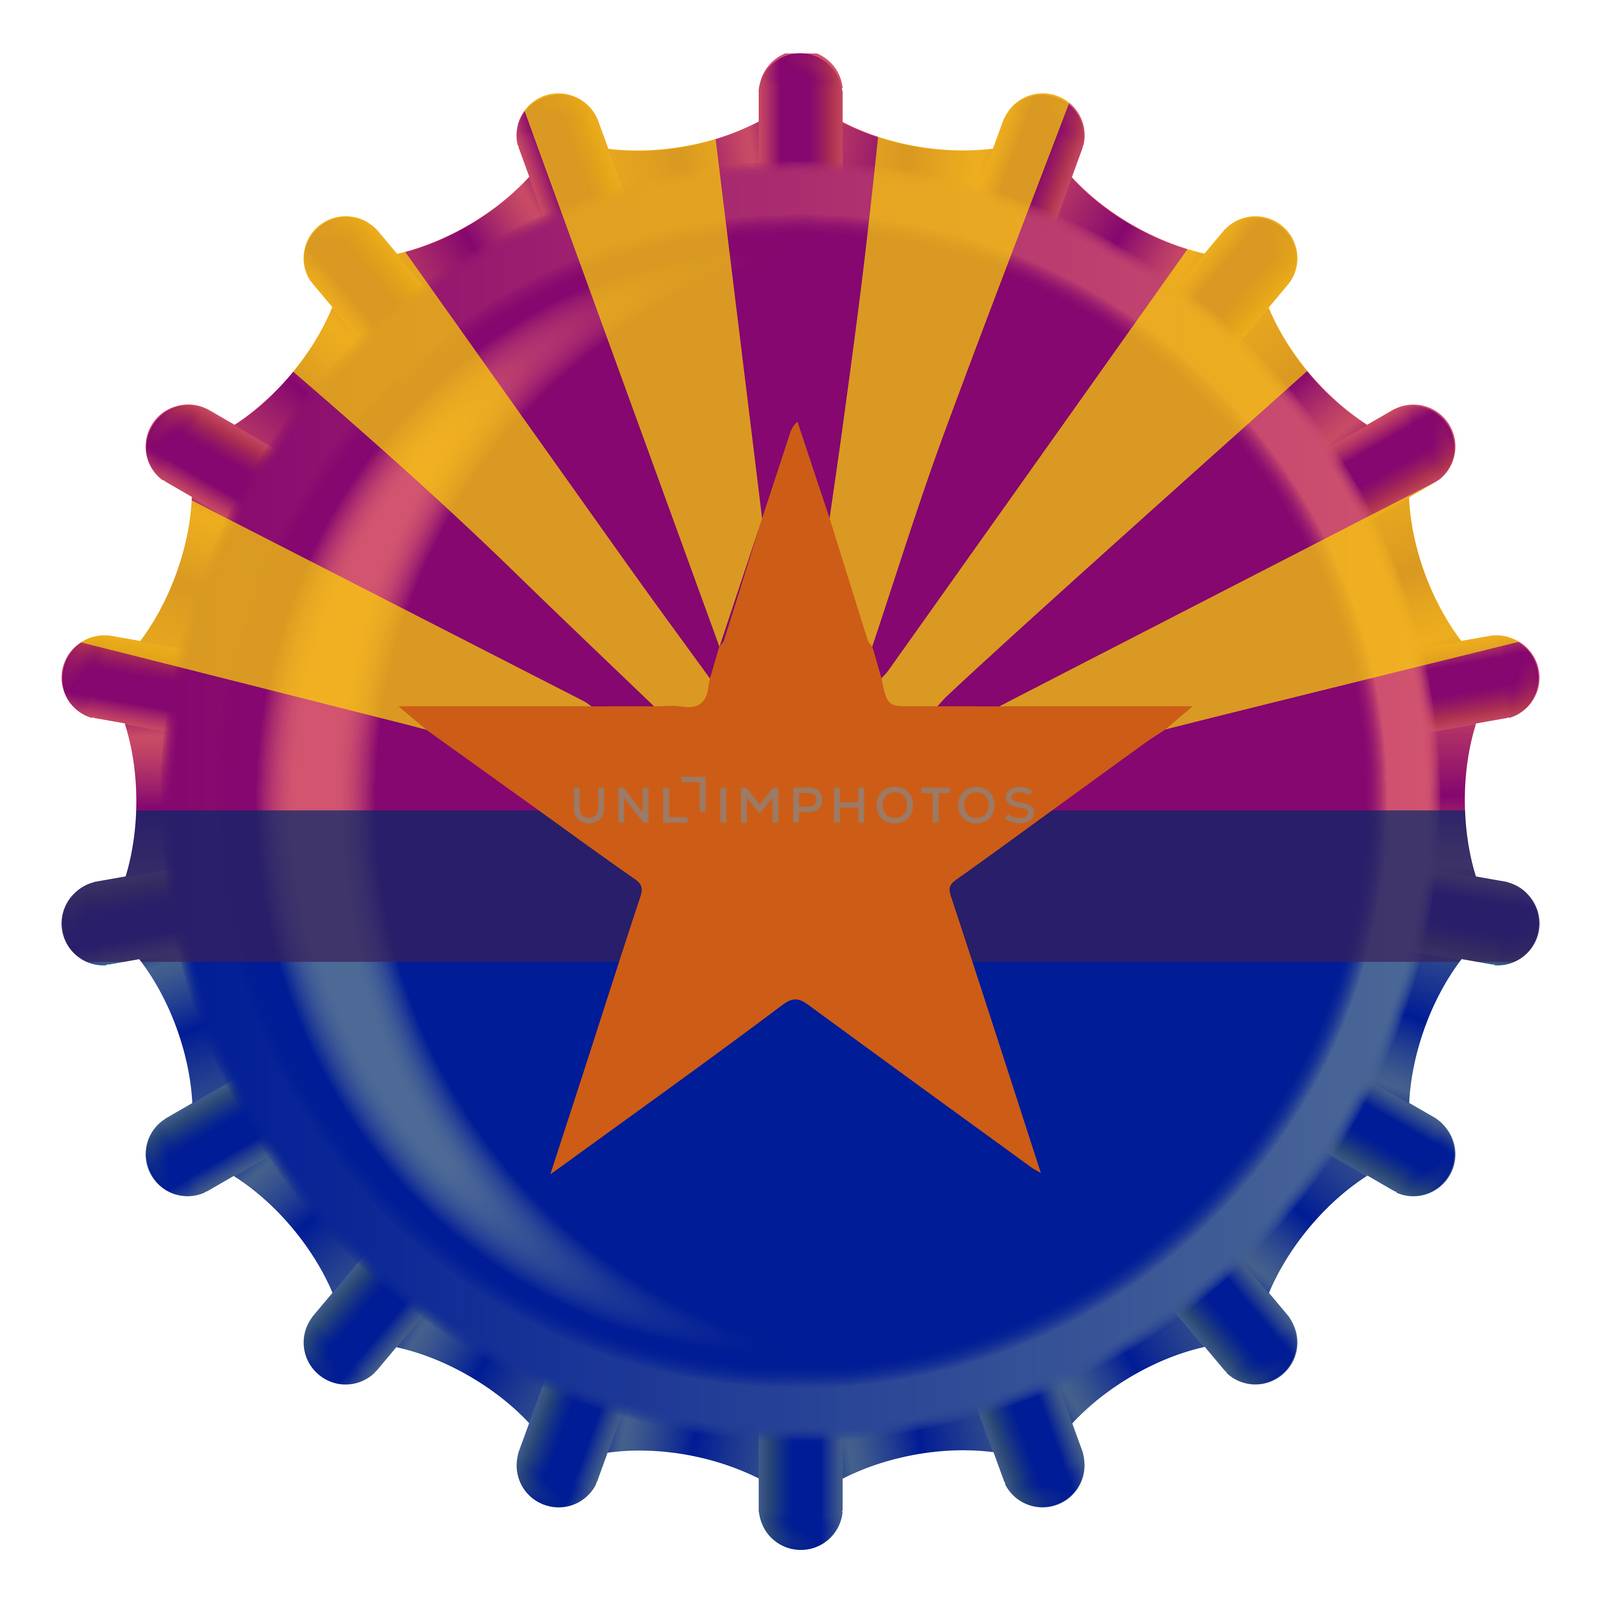 A typical metal glass bottle cap in Arizona state flag colors isolated on a white background